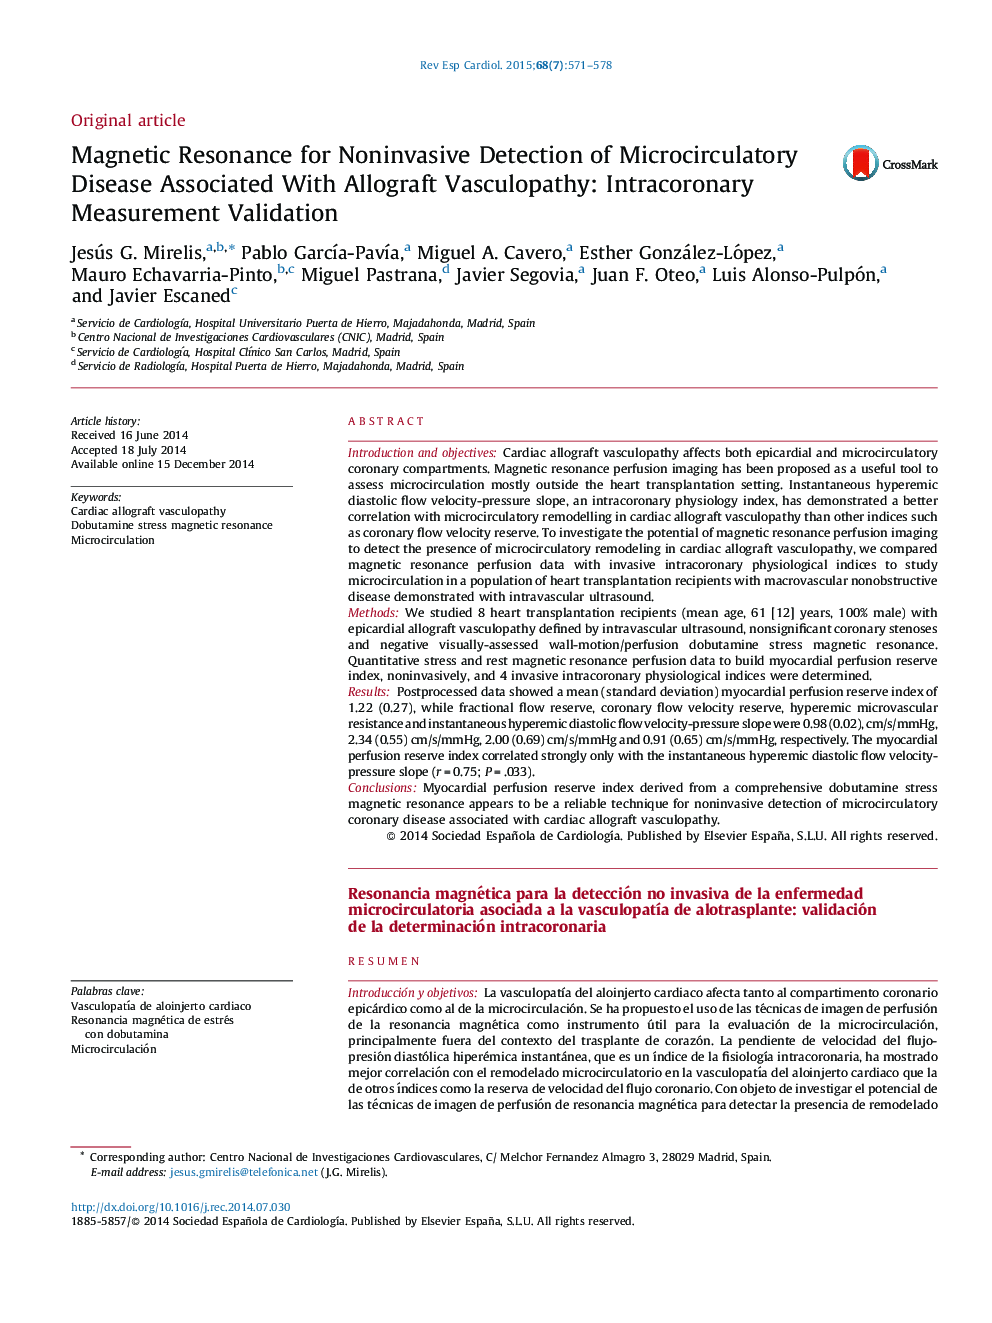 Magnetic Resonance for Noninvasive Detection of Microcirculatory Disease Associated With Allograft Vasculopathy: Intracoronary Measurement Validation